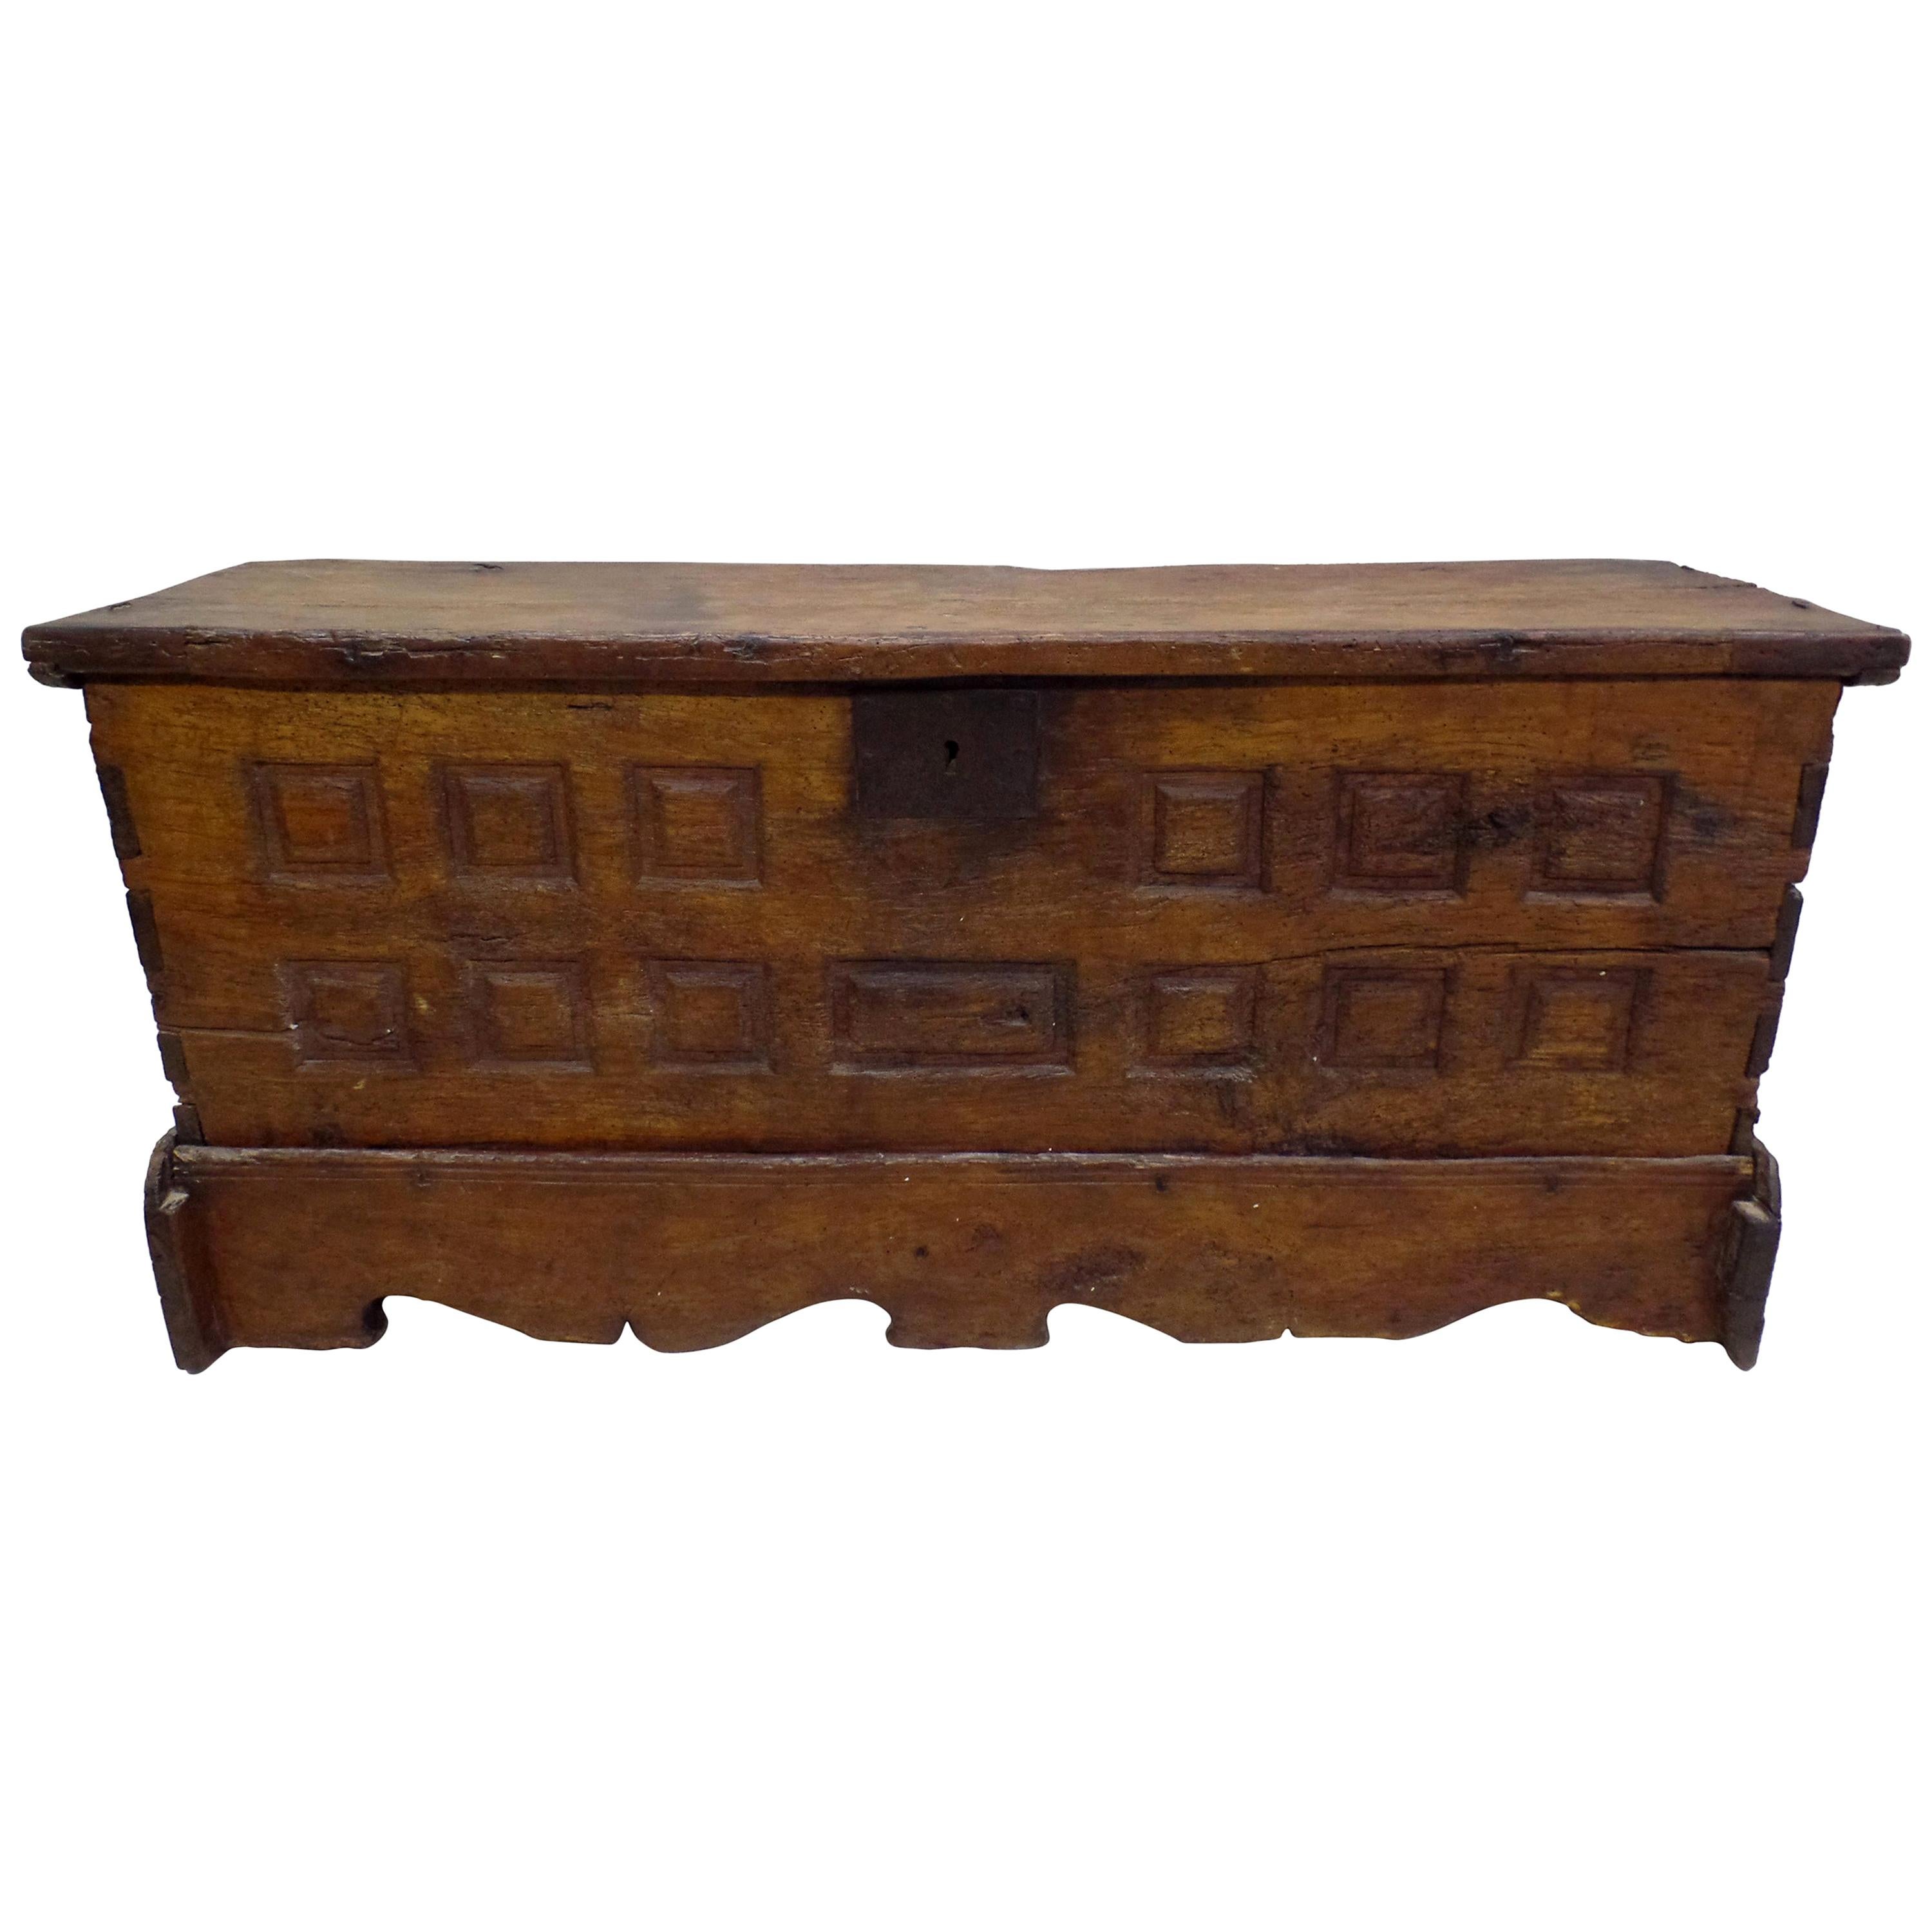 French Hand Carved Wood Directoire Coffre or Chest/ Armoire/ Bench, circa 1795